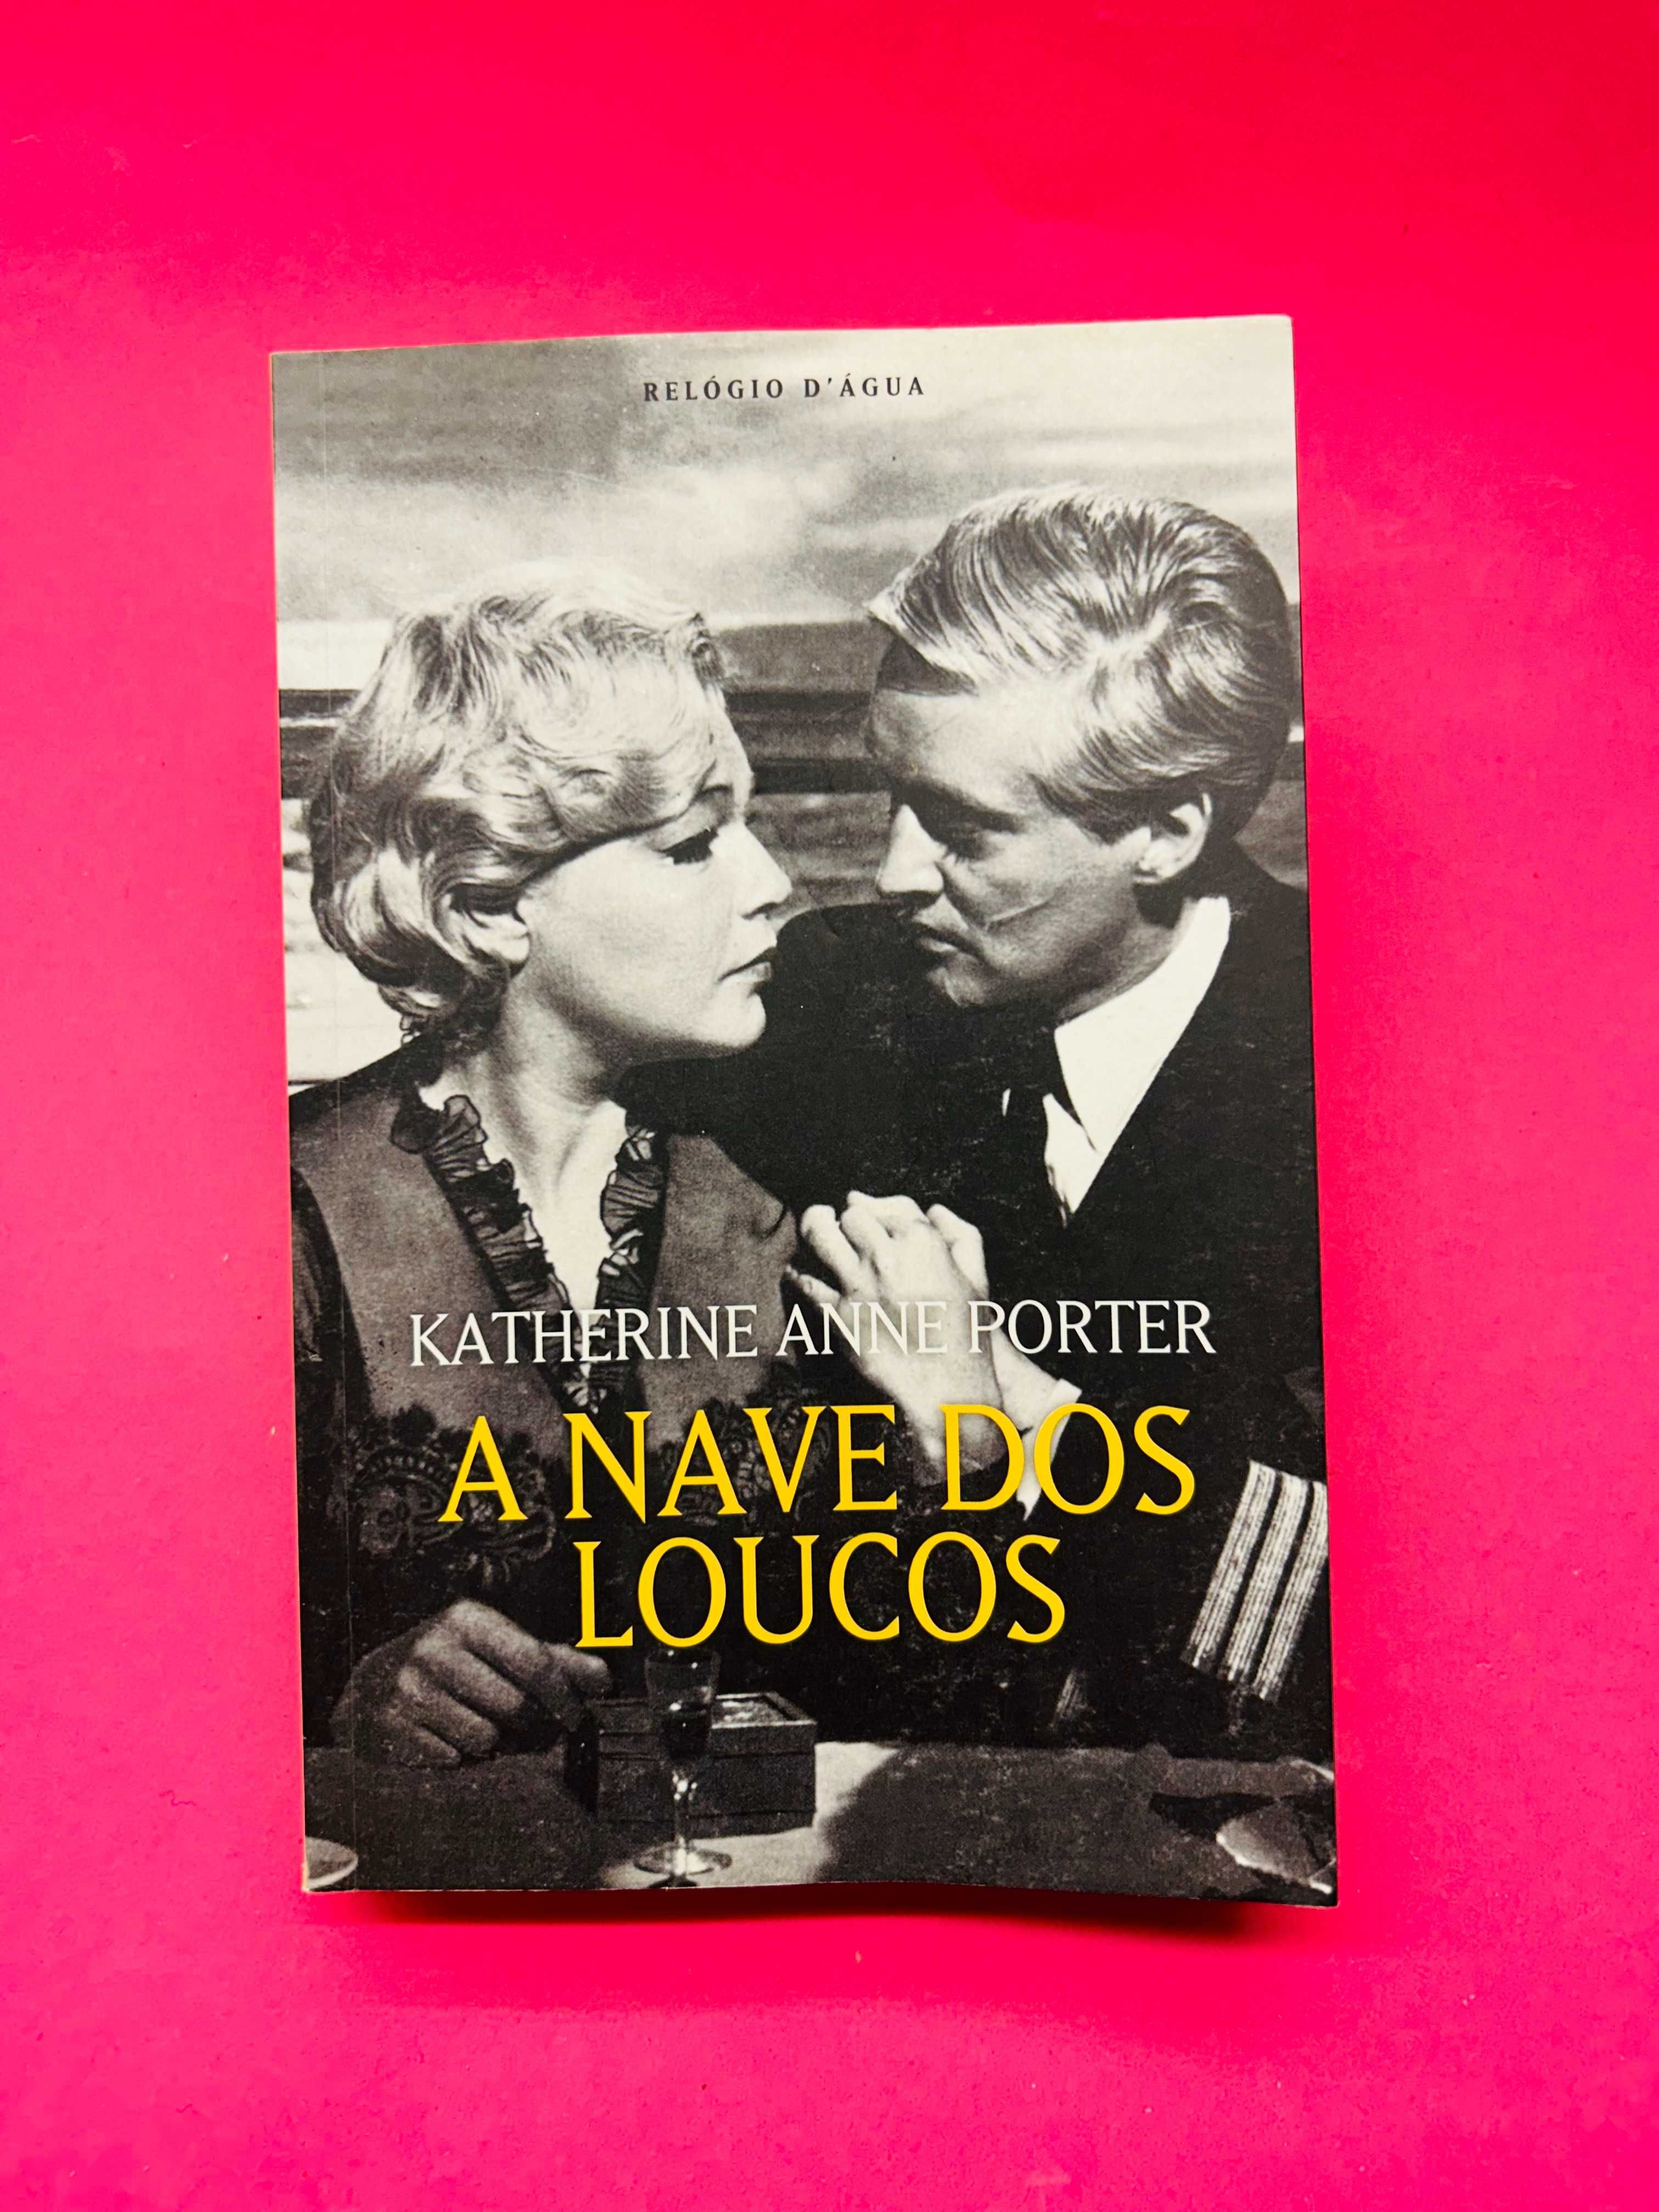 A Nave dos Loucos - Katherine Anne Porter